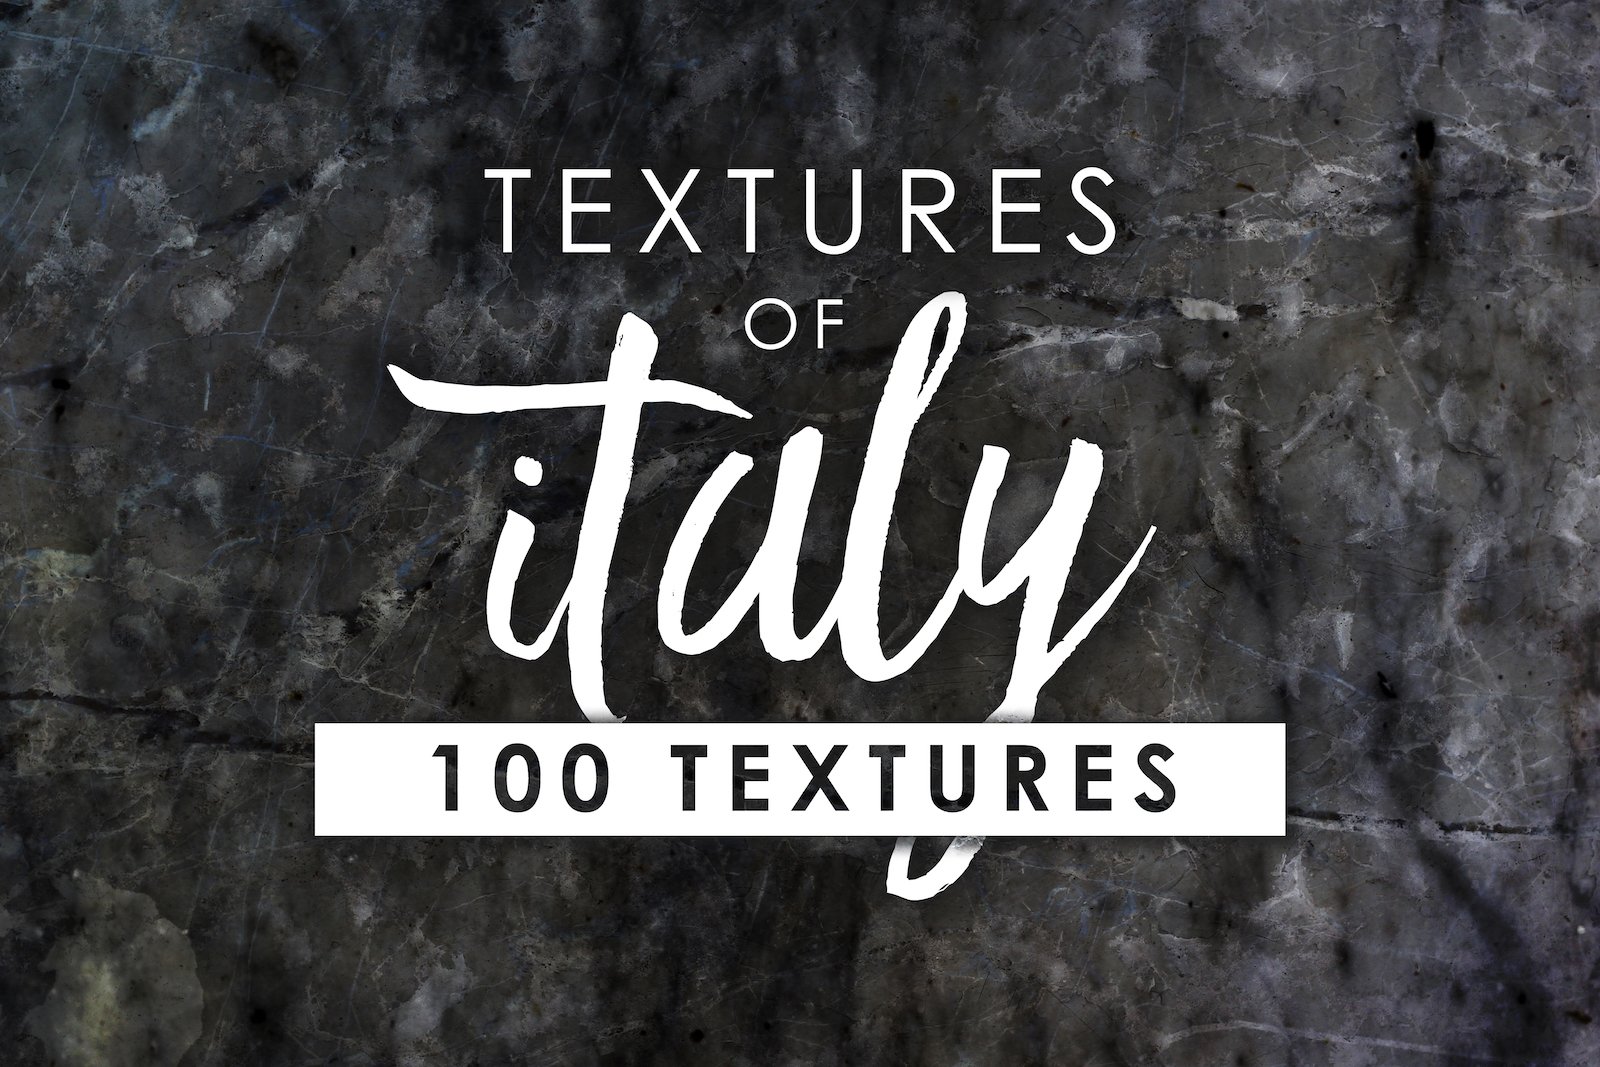 100 Textures of Italy cover image.